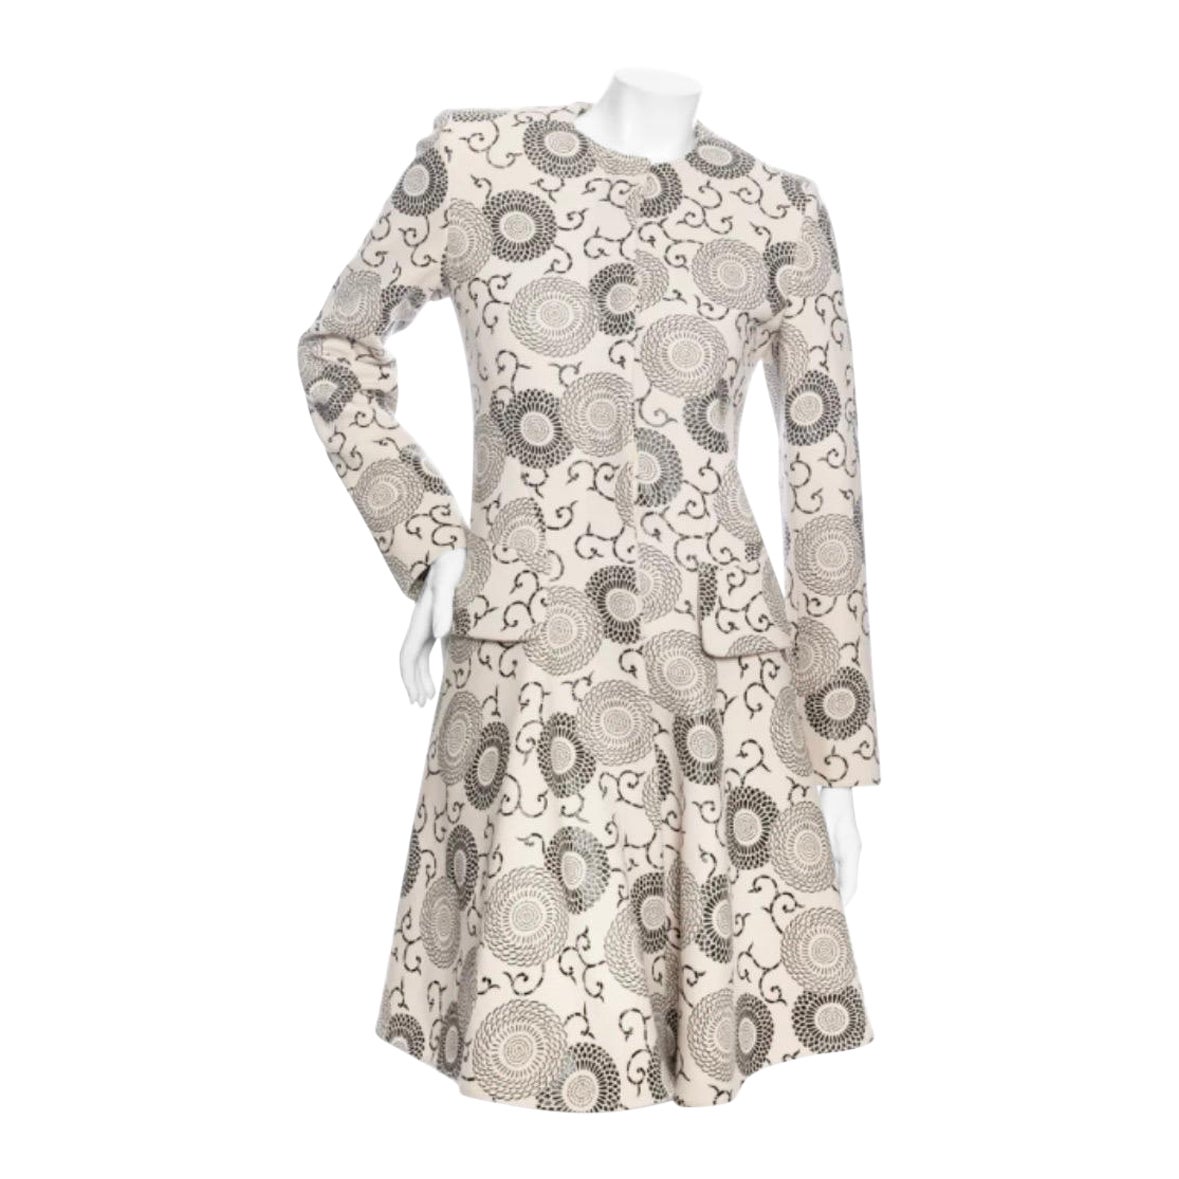 Etro Cream and Black Floral Print Swing Coat Fall2012 For Sale